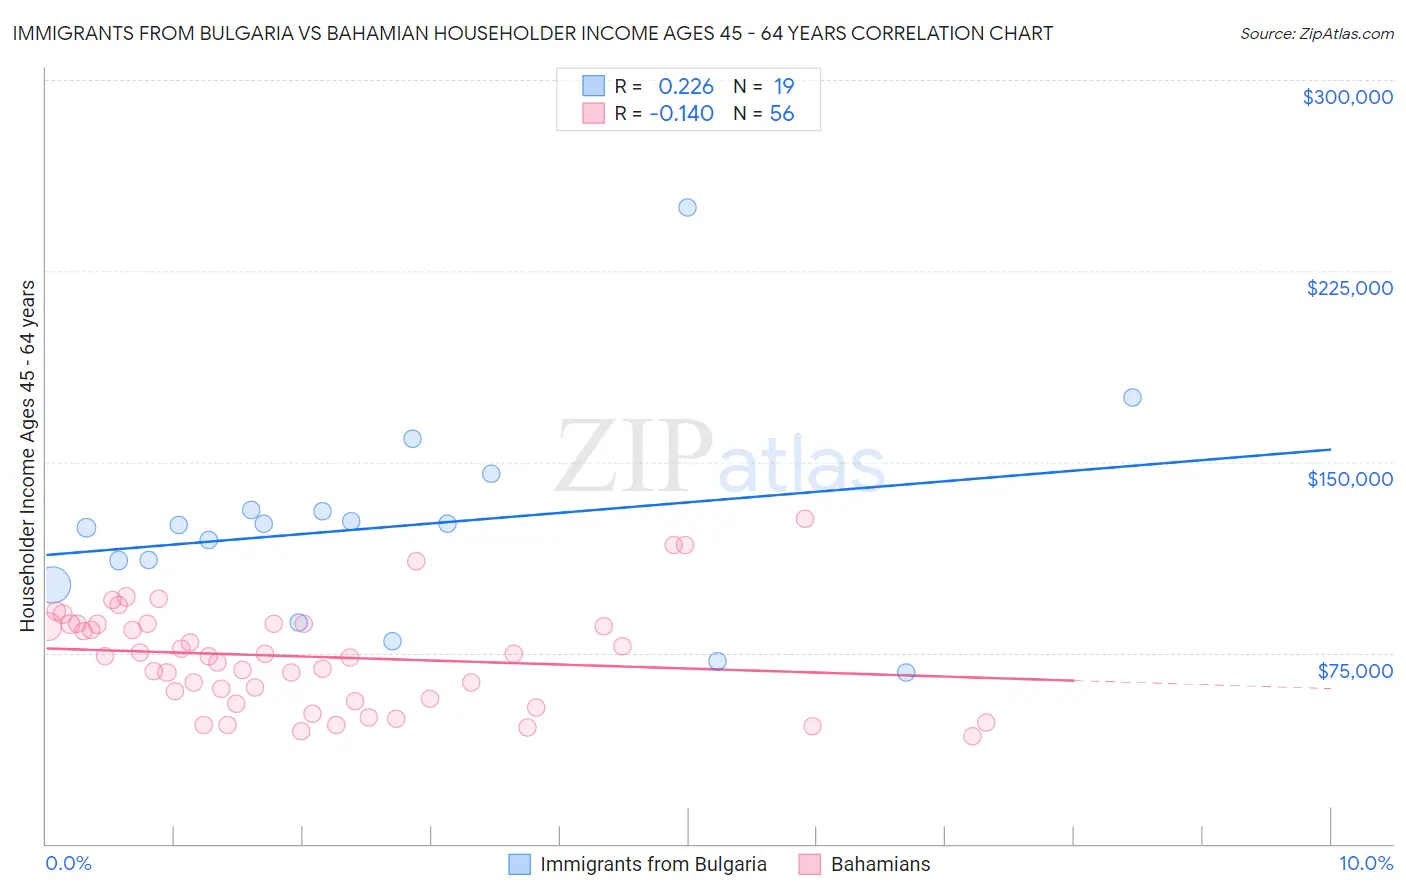 Immigrants from Bulgaria vs Bahamian Householder Income Ages 45 - 64 years